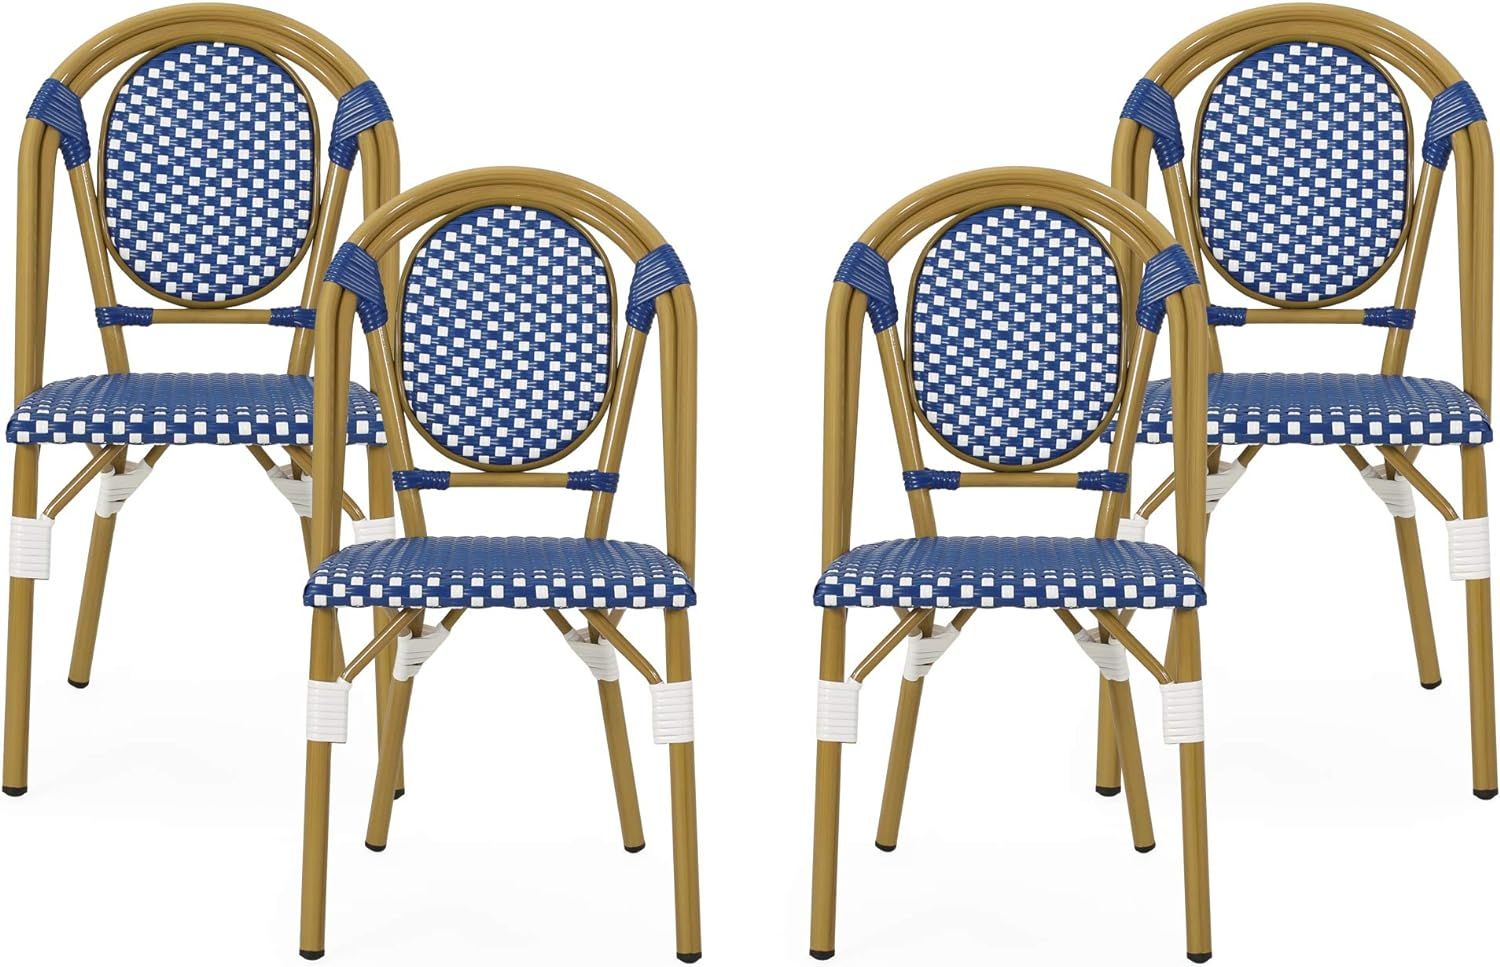 Christopher Knight Home Gwendolyn Outdoor French Bistro Chairs (Set of 4), Blue + White + Bamboo ... | Amazon (US)